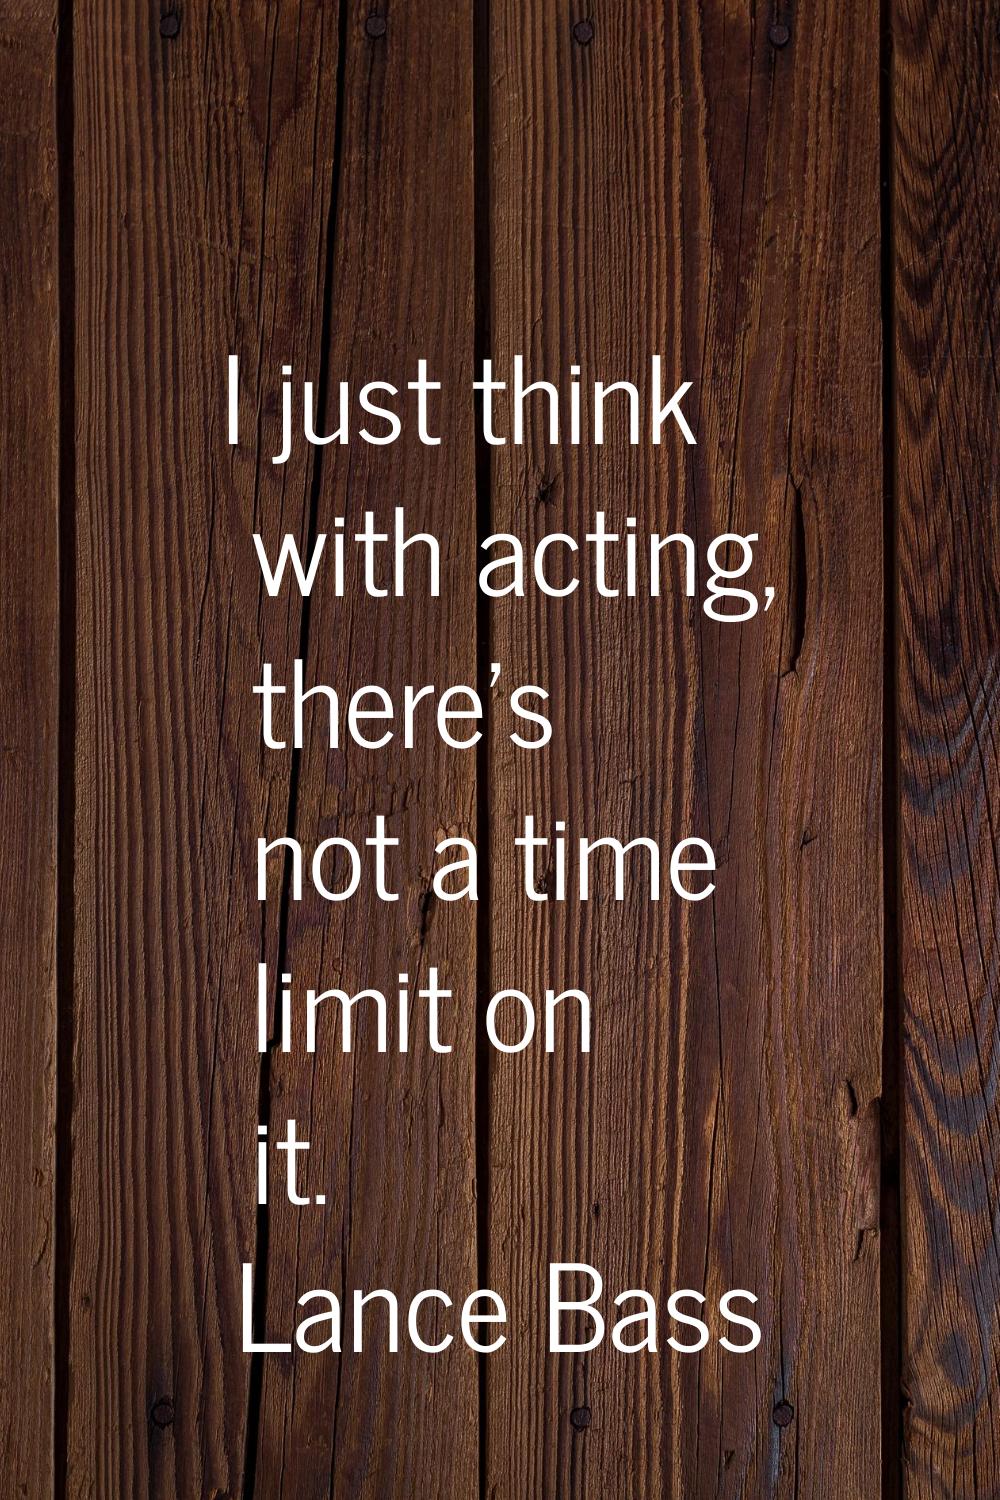 I just think with acting, there's not a time limit on it.